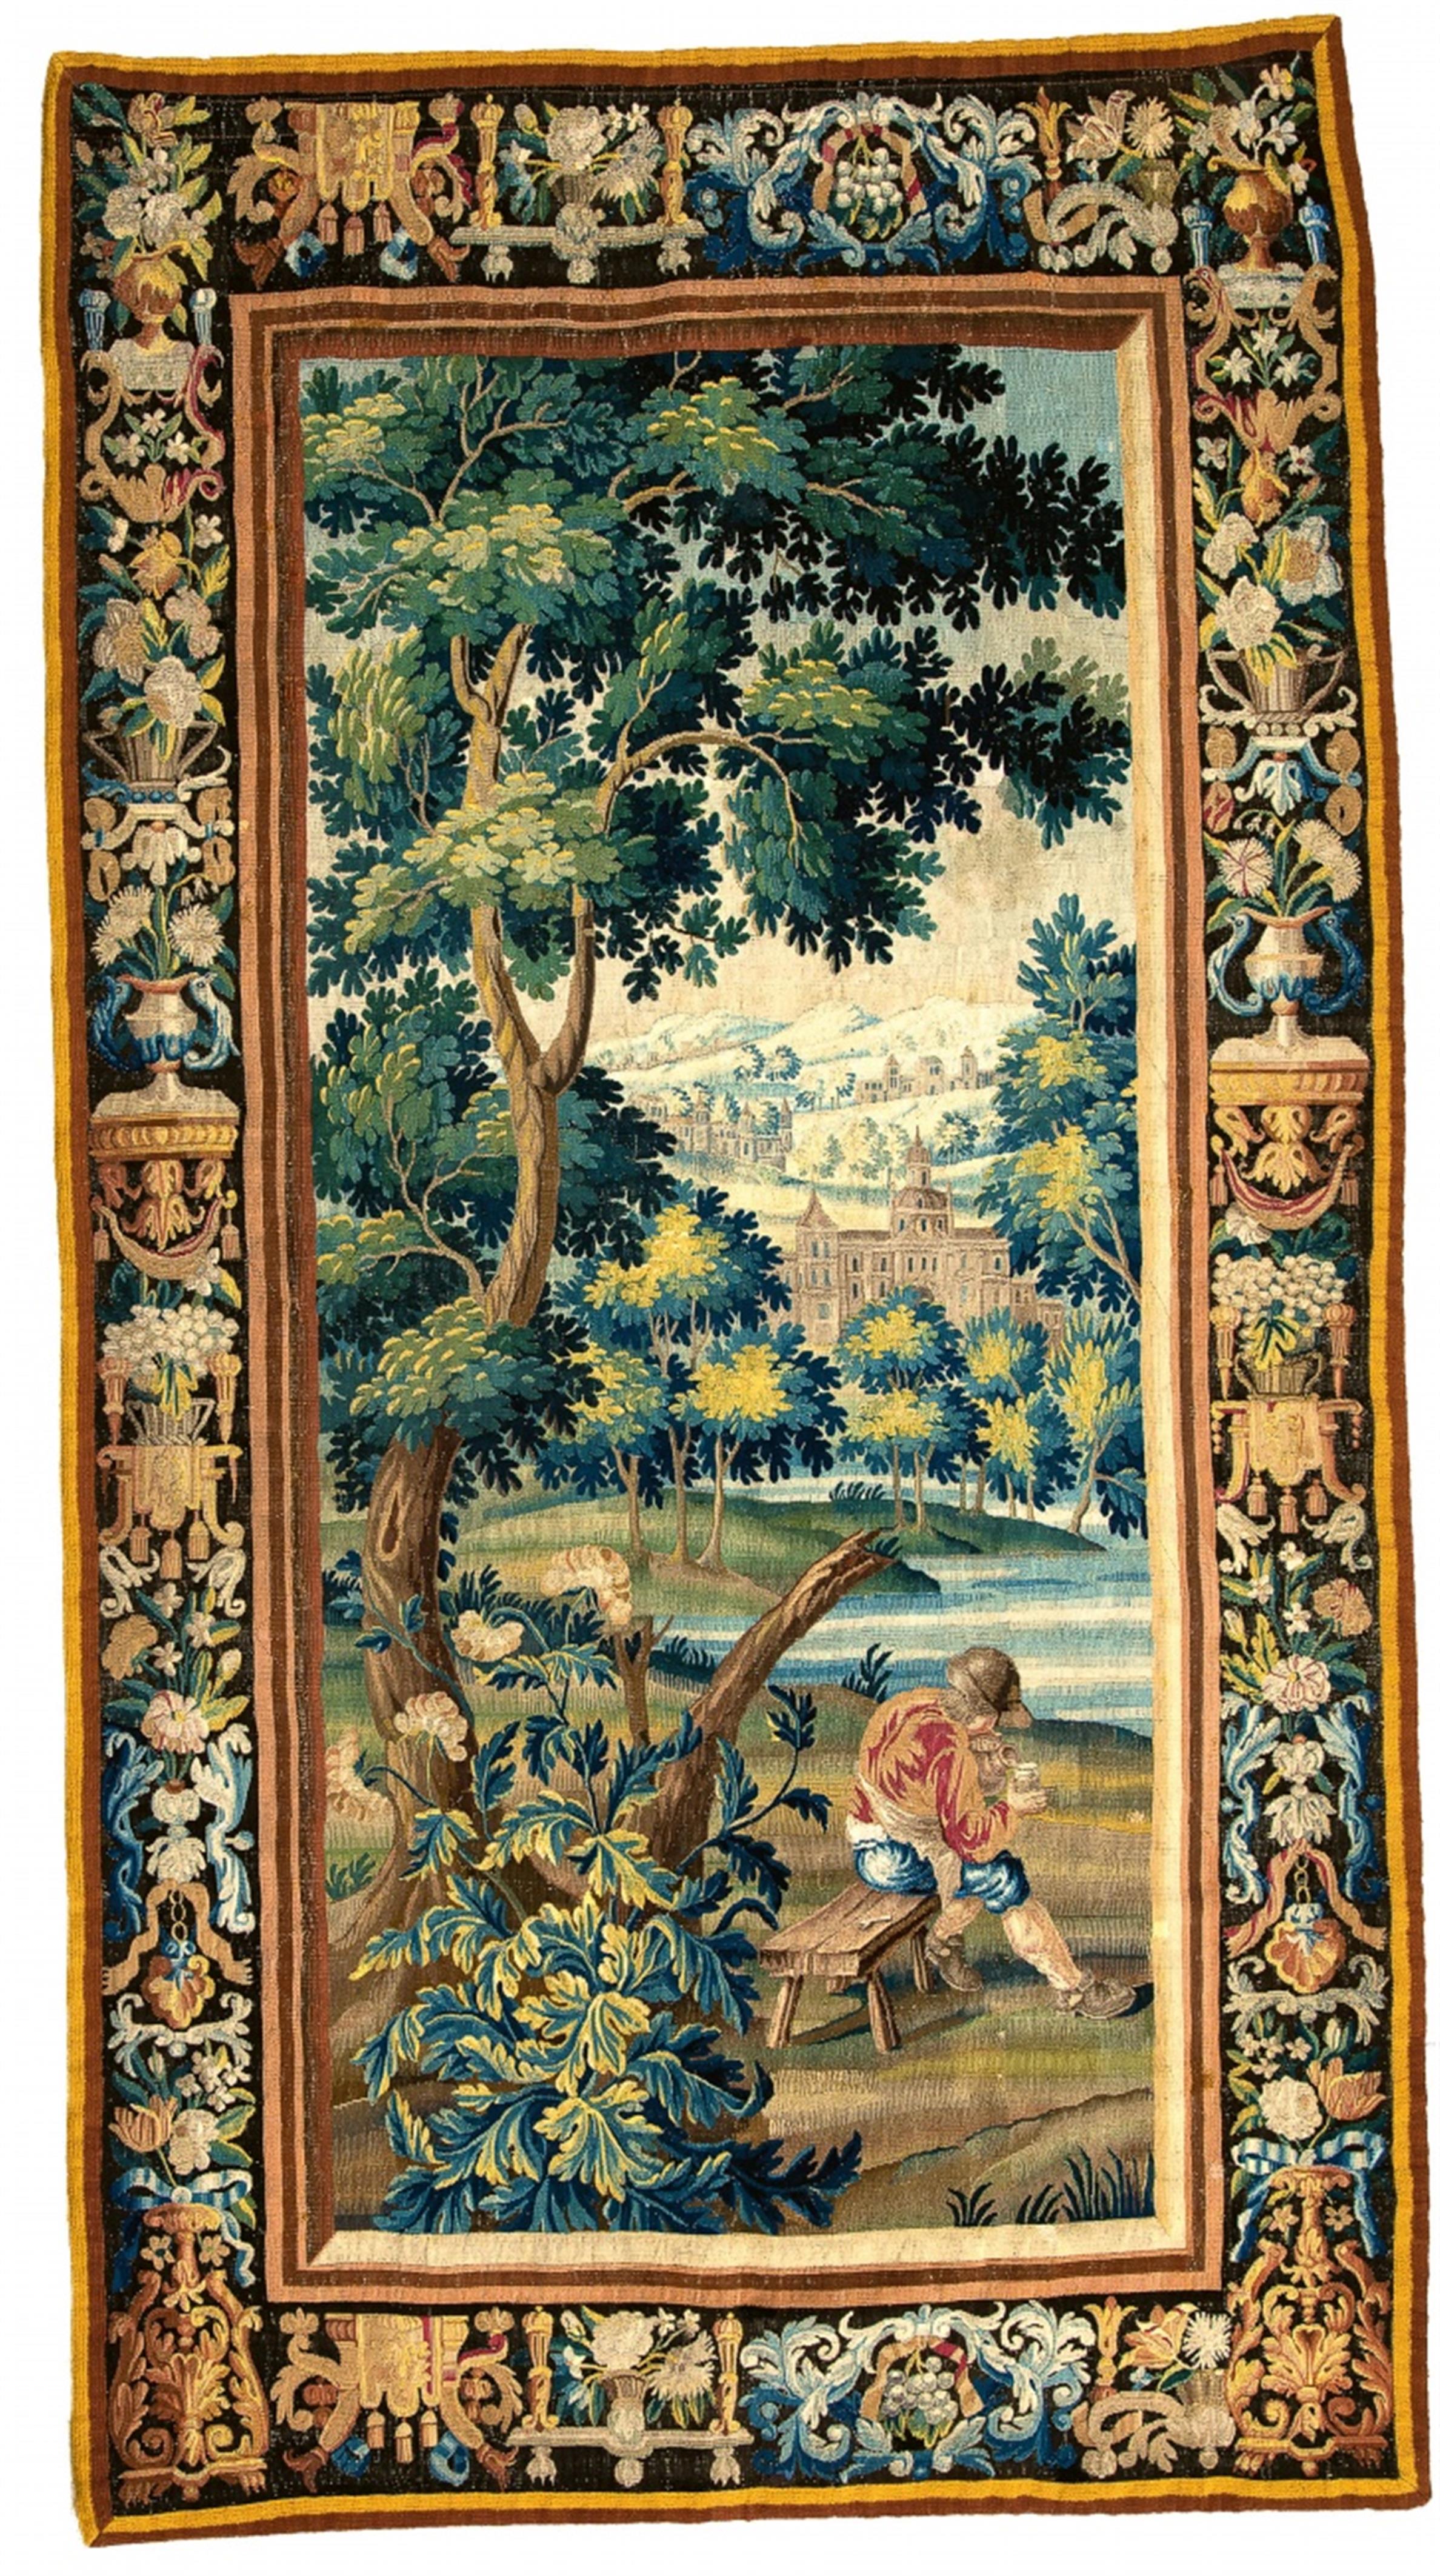 A Flemish tapestry with a peasant scene - image-1